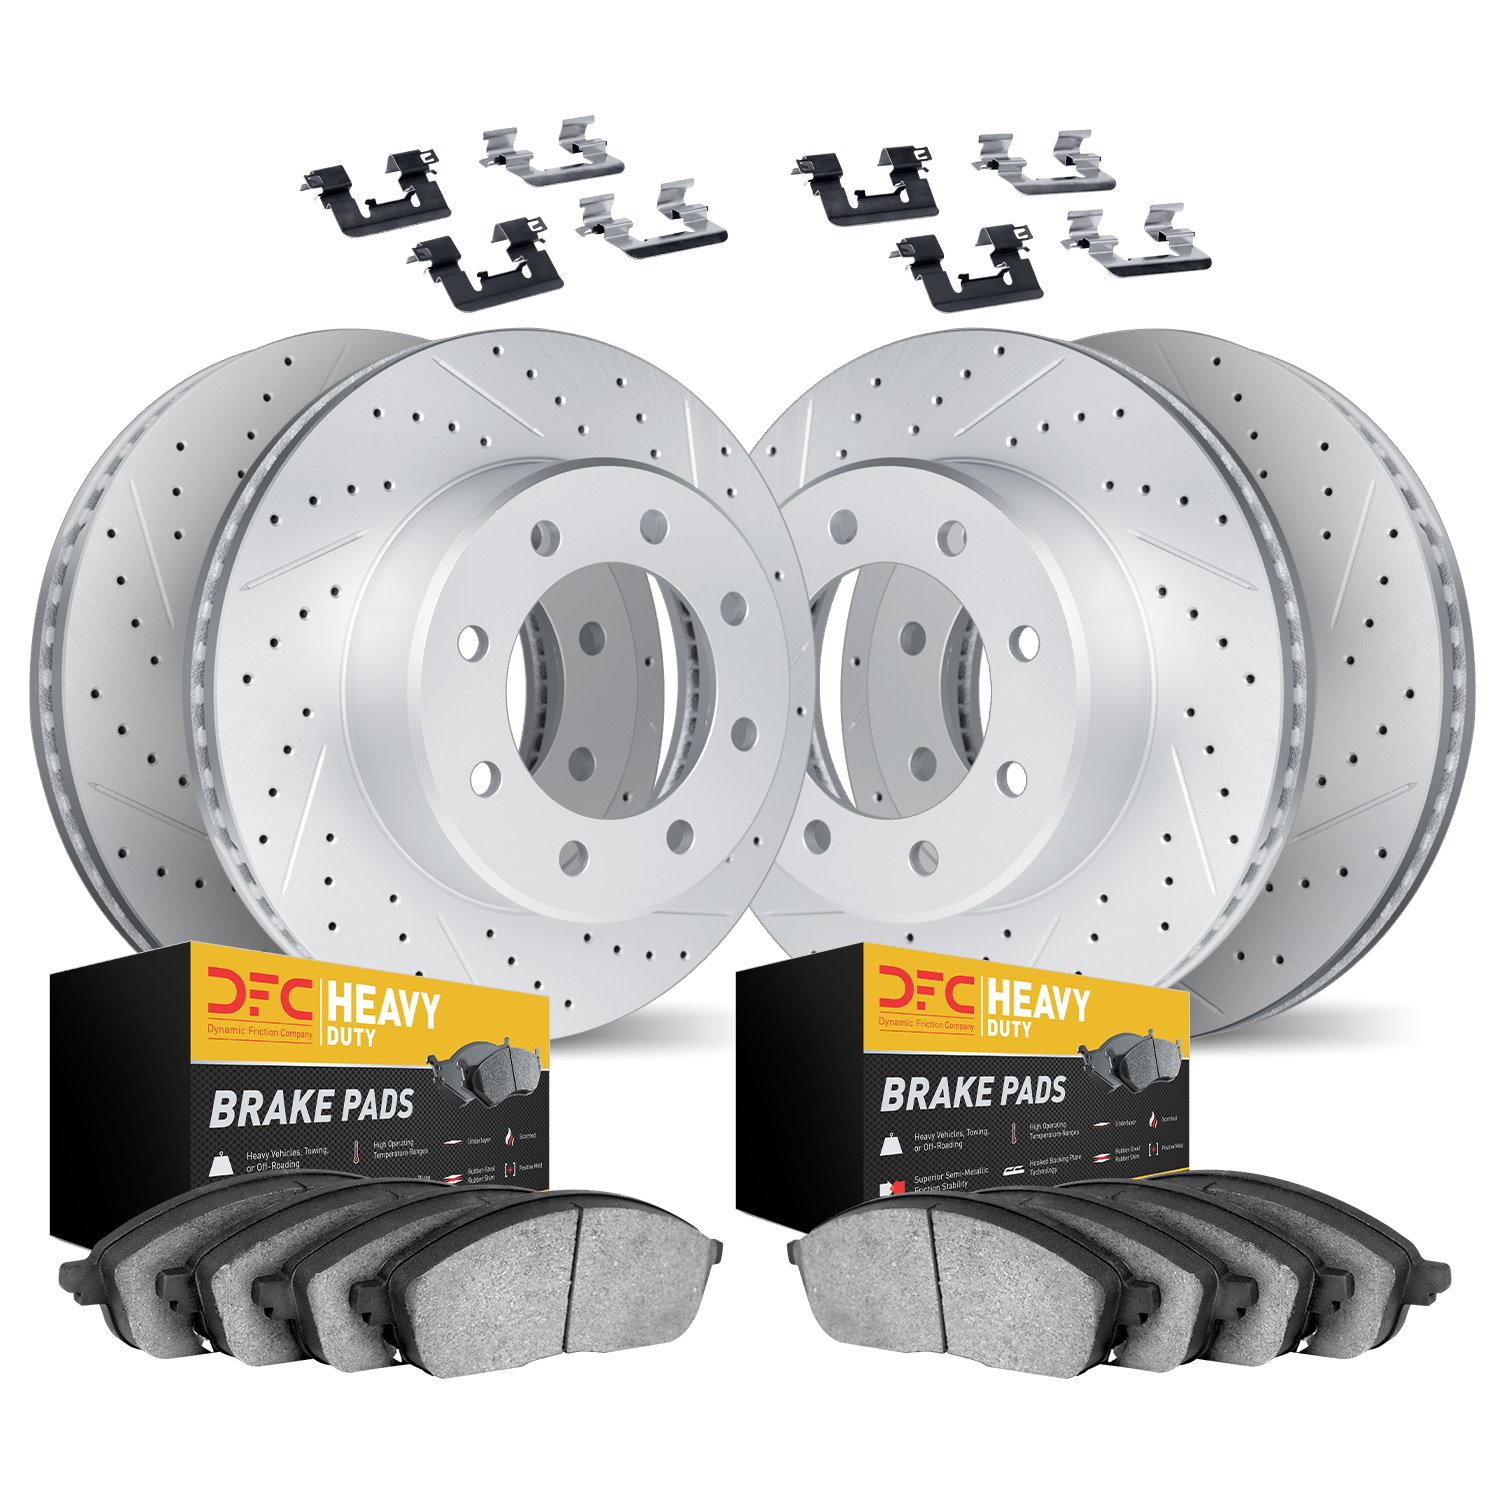 2214-99036 Geoperformance Drilled/Slotted Rotors w/Heavy-Duty Pads Kit & Hardware, 1999-2004 Ford/Lincoln/Mercury/Mazda, Positio